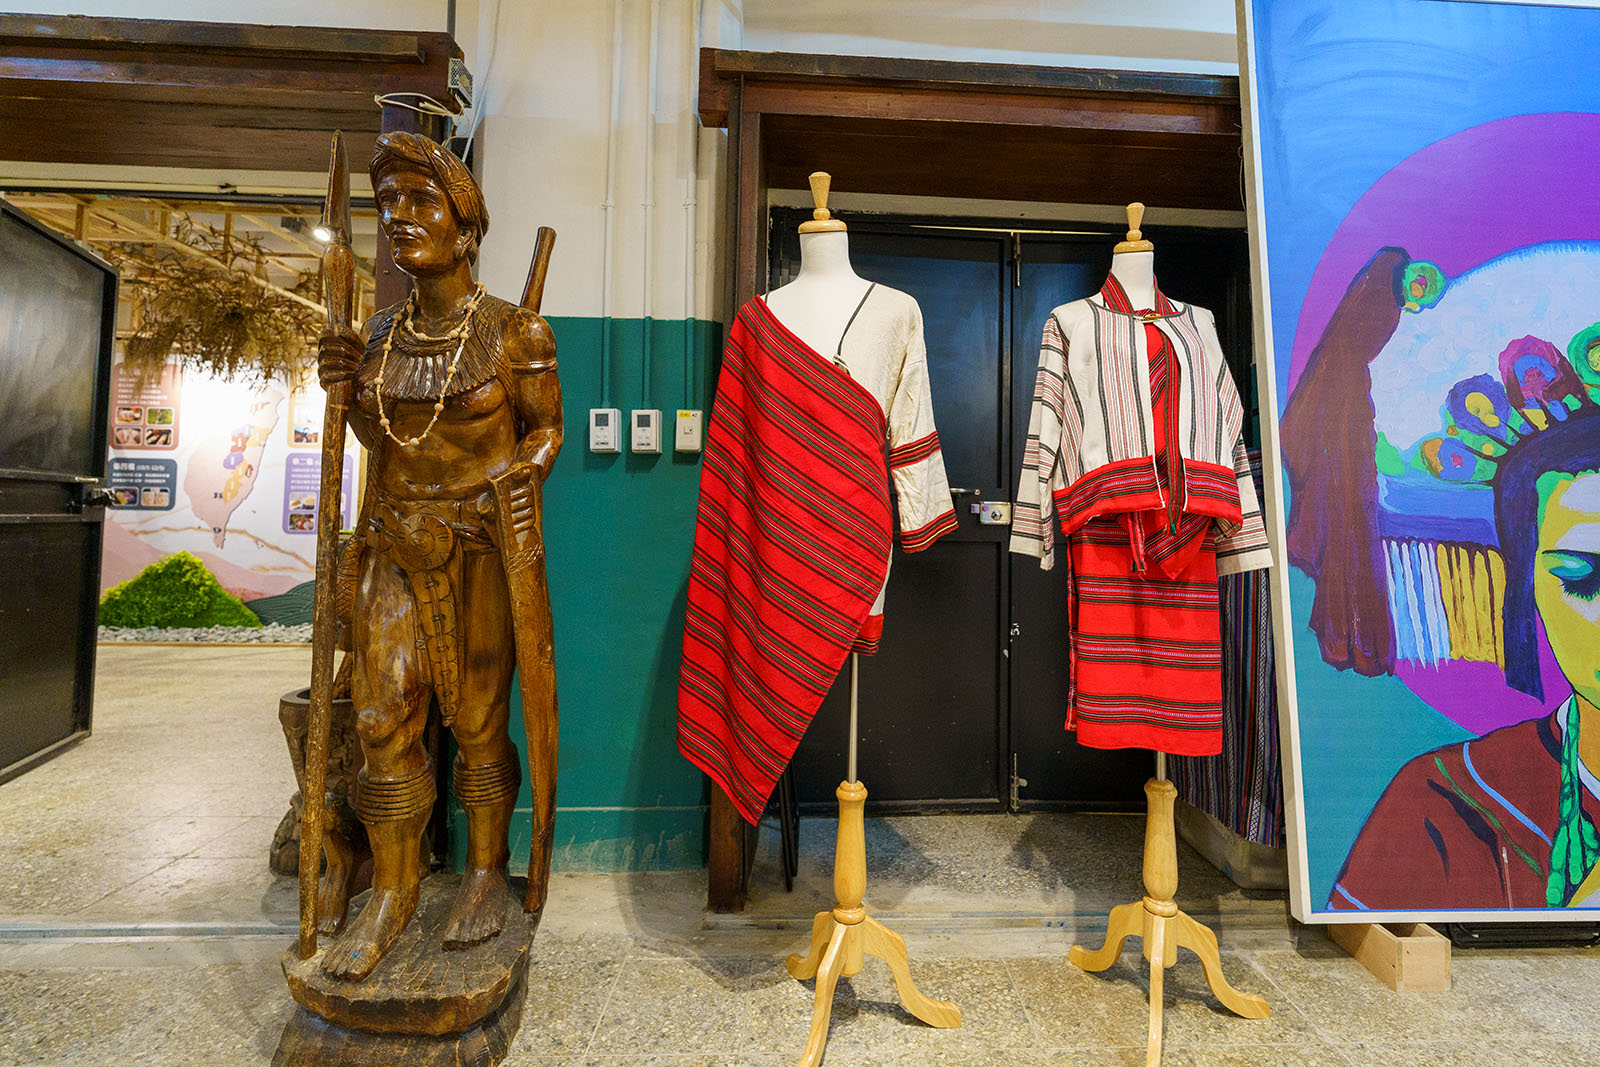 An exhibition on indigenous culture in Songshan Creative and Cultural Park.